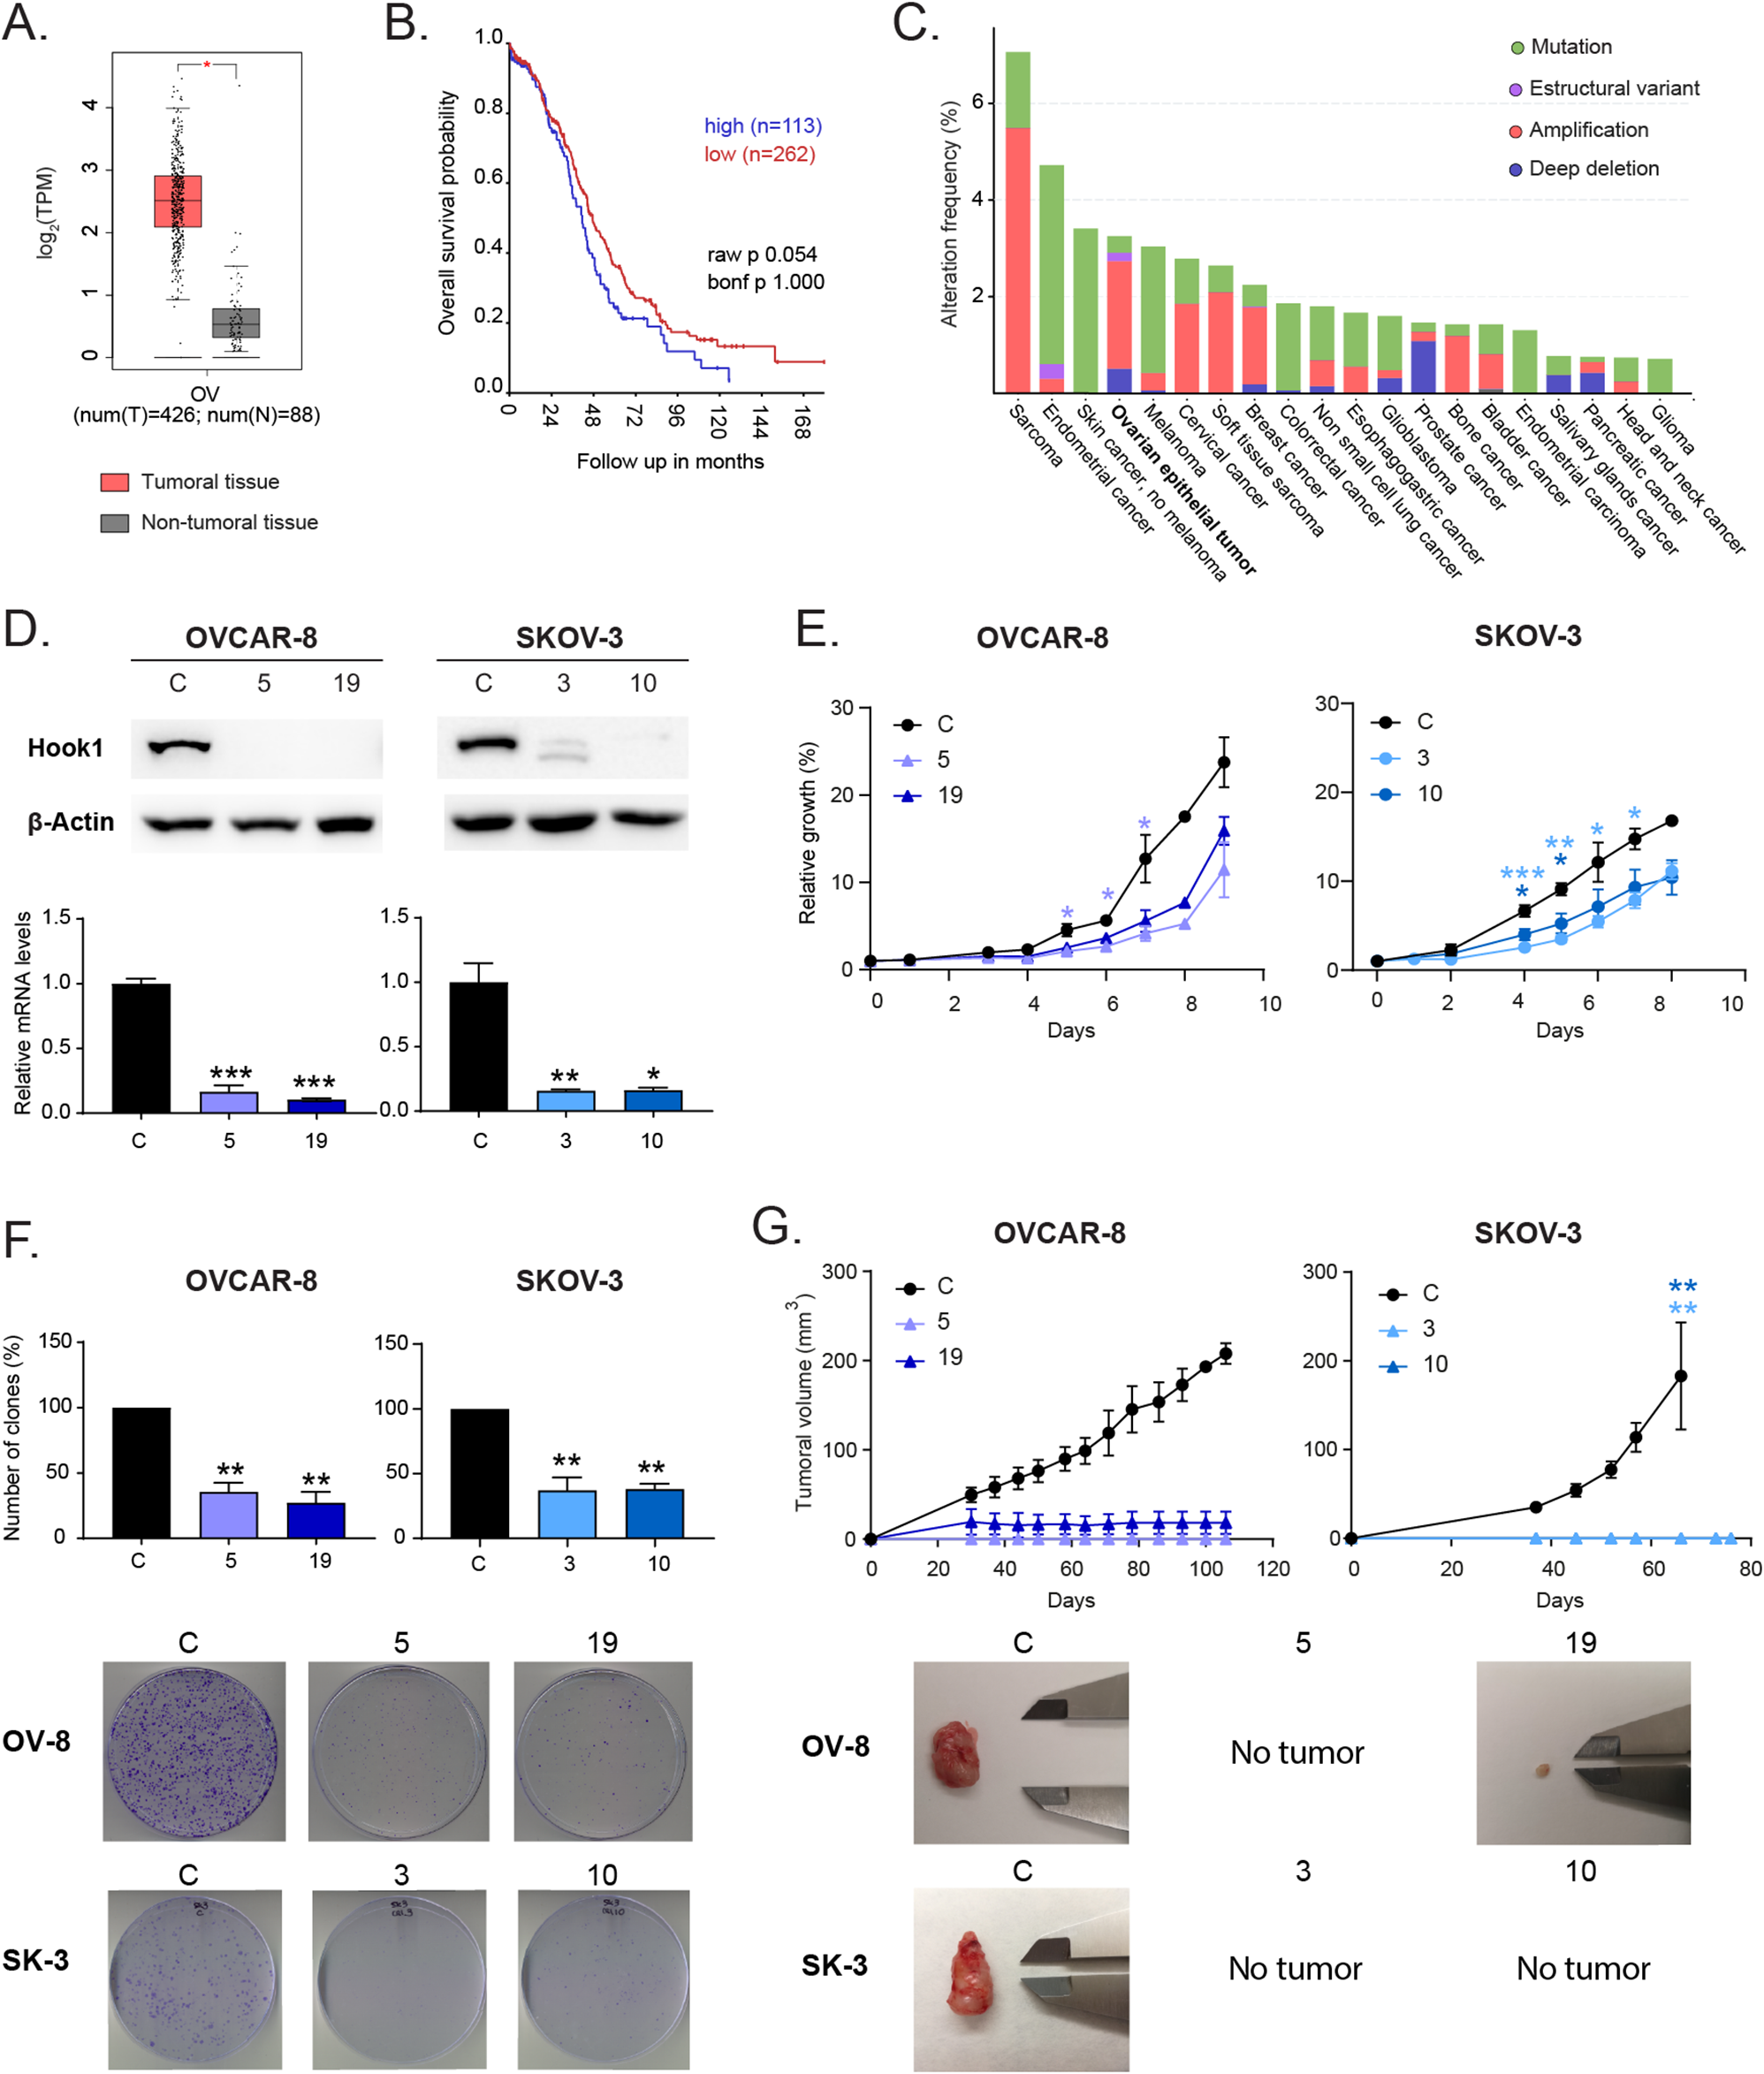 Protein homeostasis maintained by HOOK1 levels promotes the tumorigenic and stemness properties of ovarian cancer cells through reticulum stress and autophagy